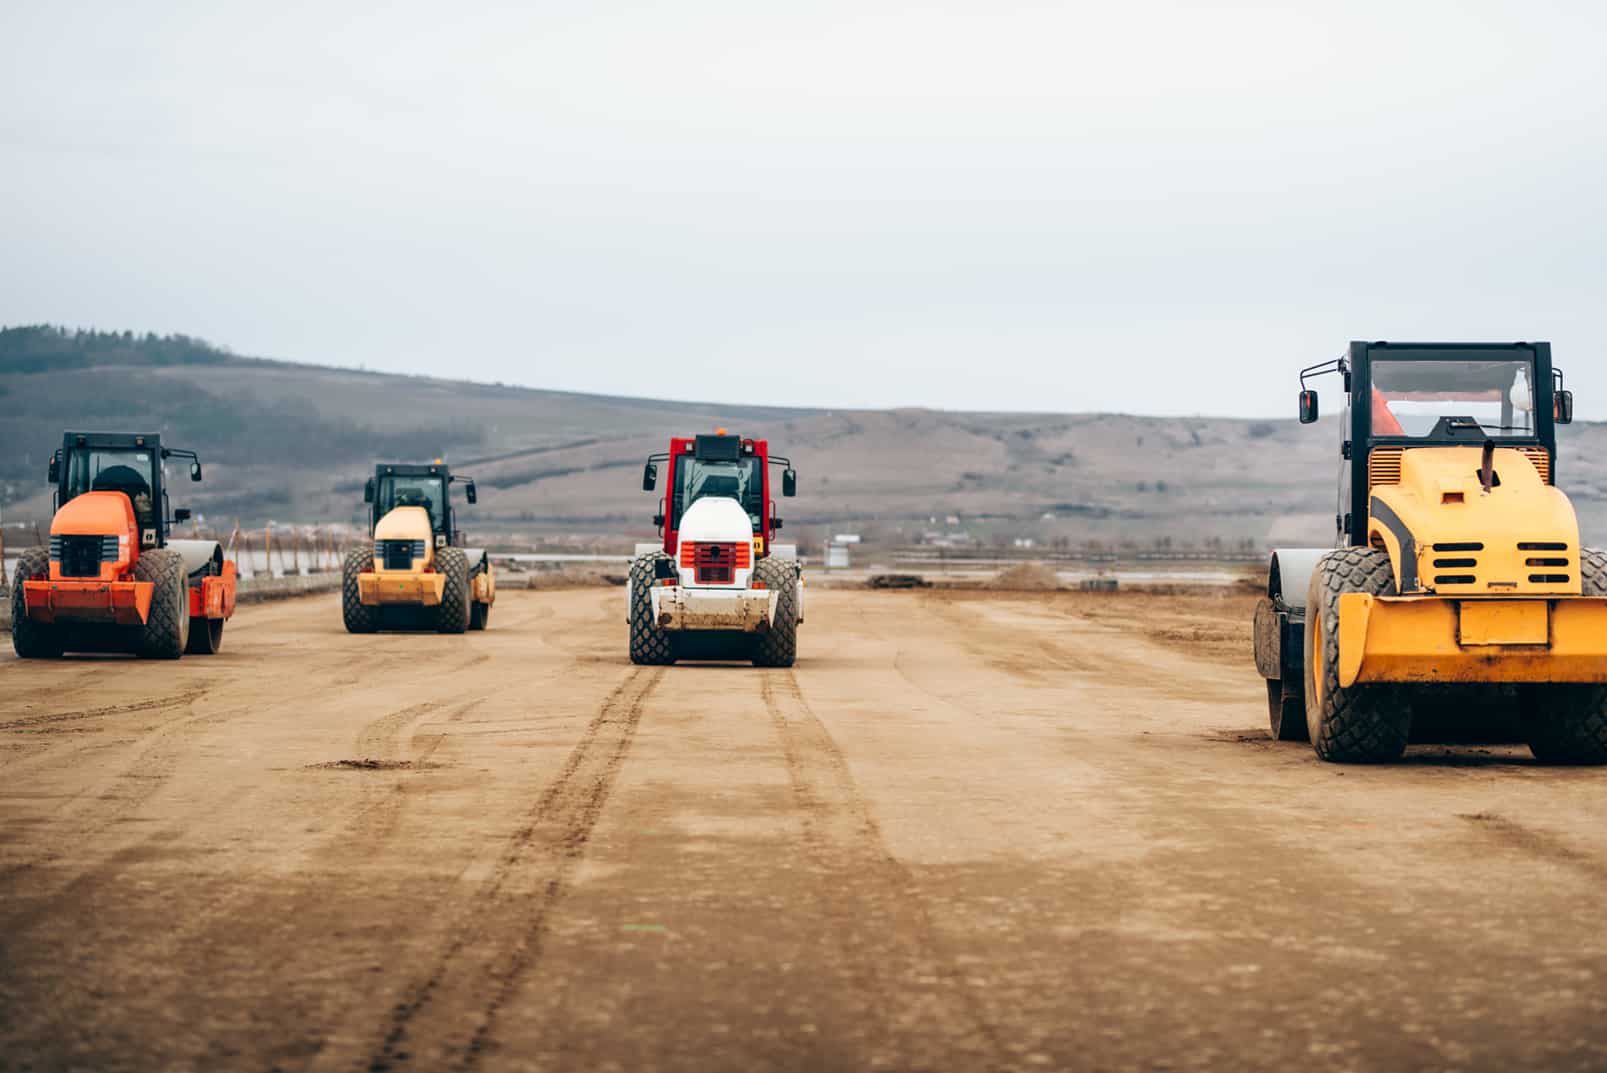 Vibratory Compactor during road and highway construction. Industrial roadworks with heavy-duty machinery with a goal towards economic development